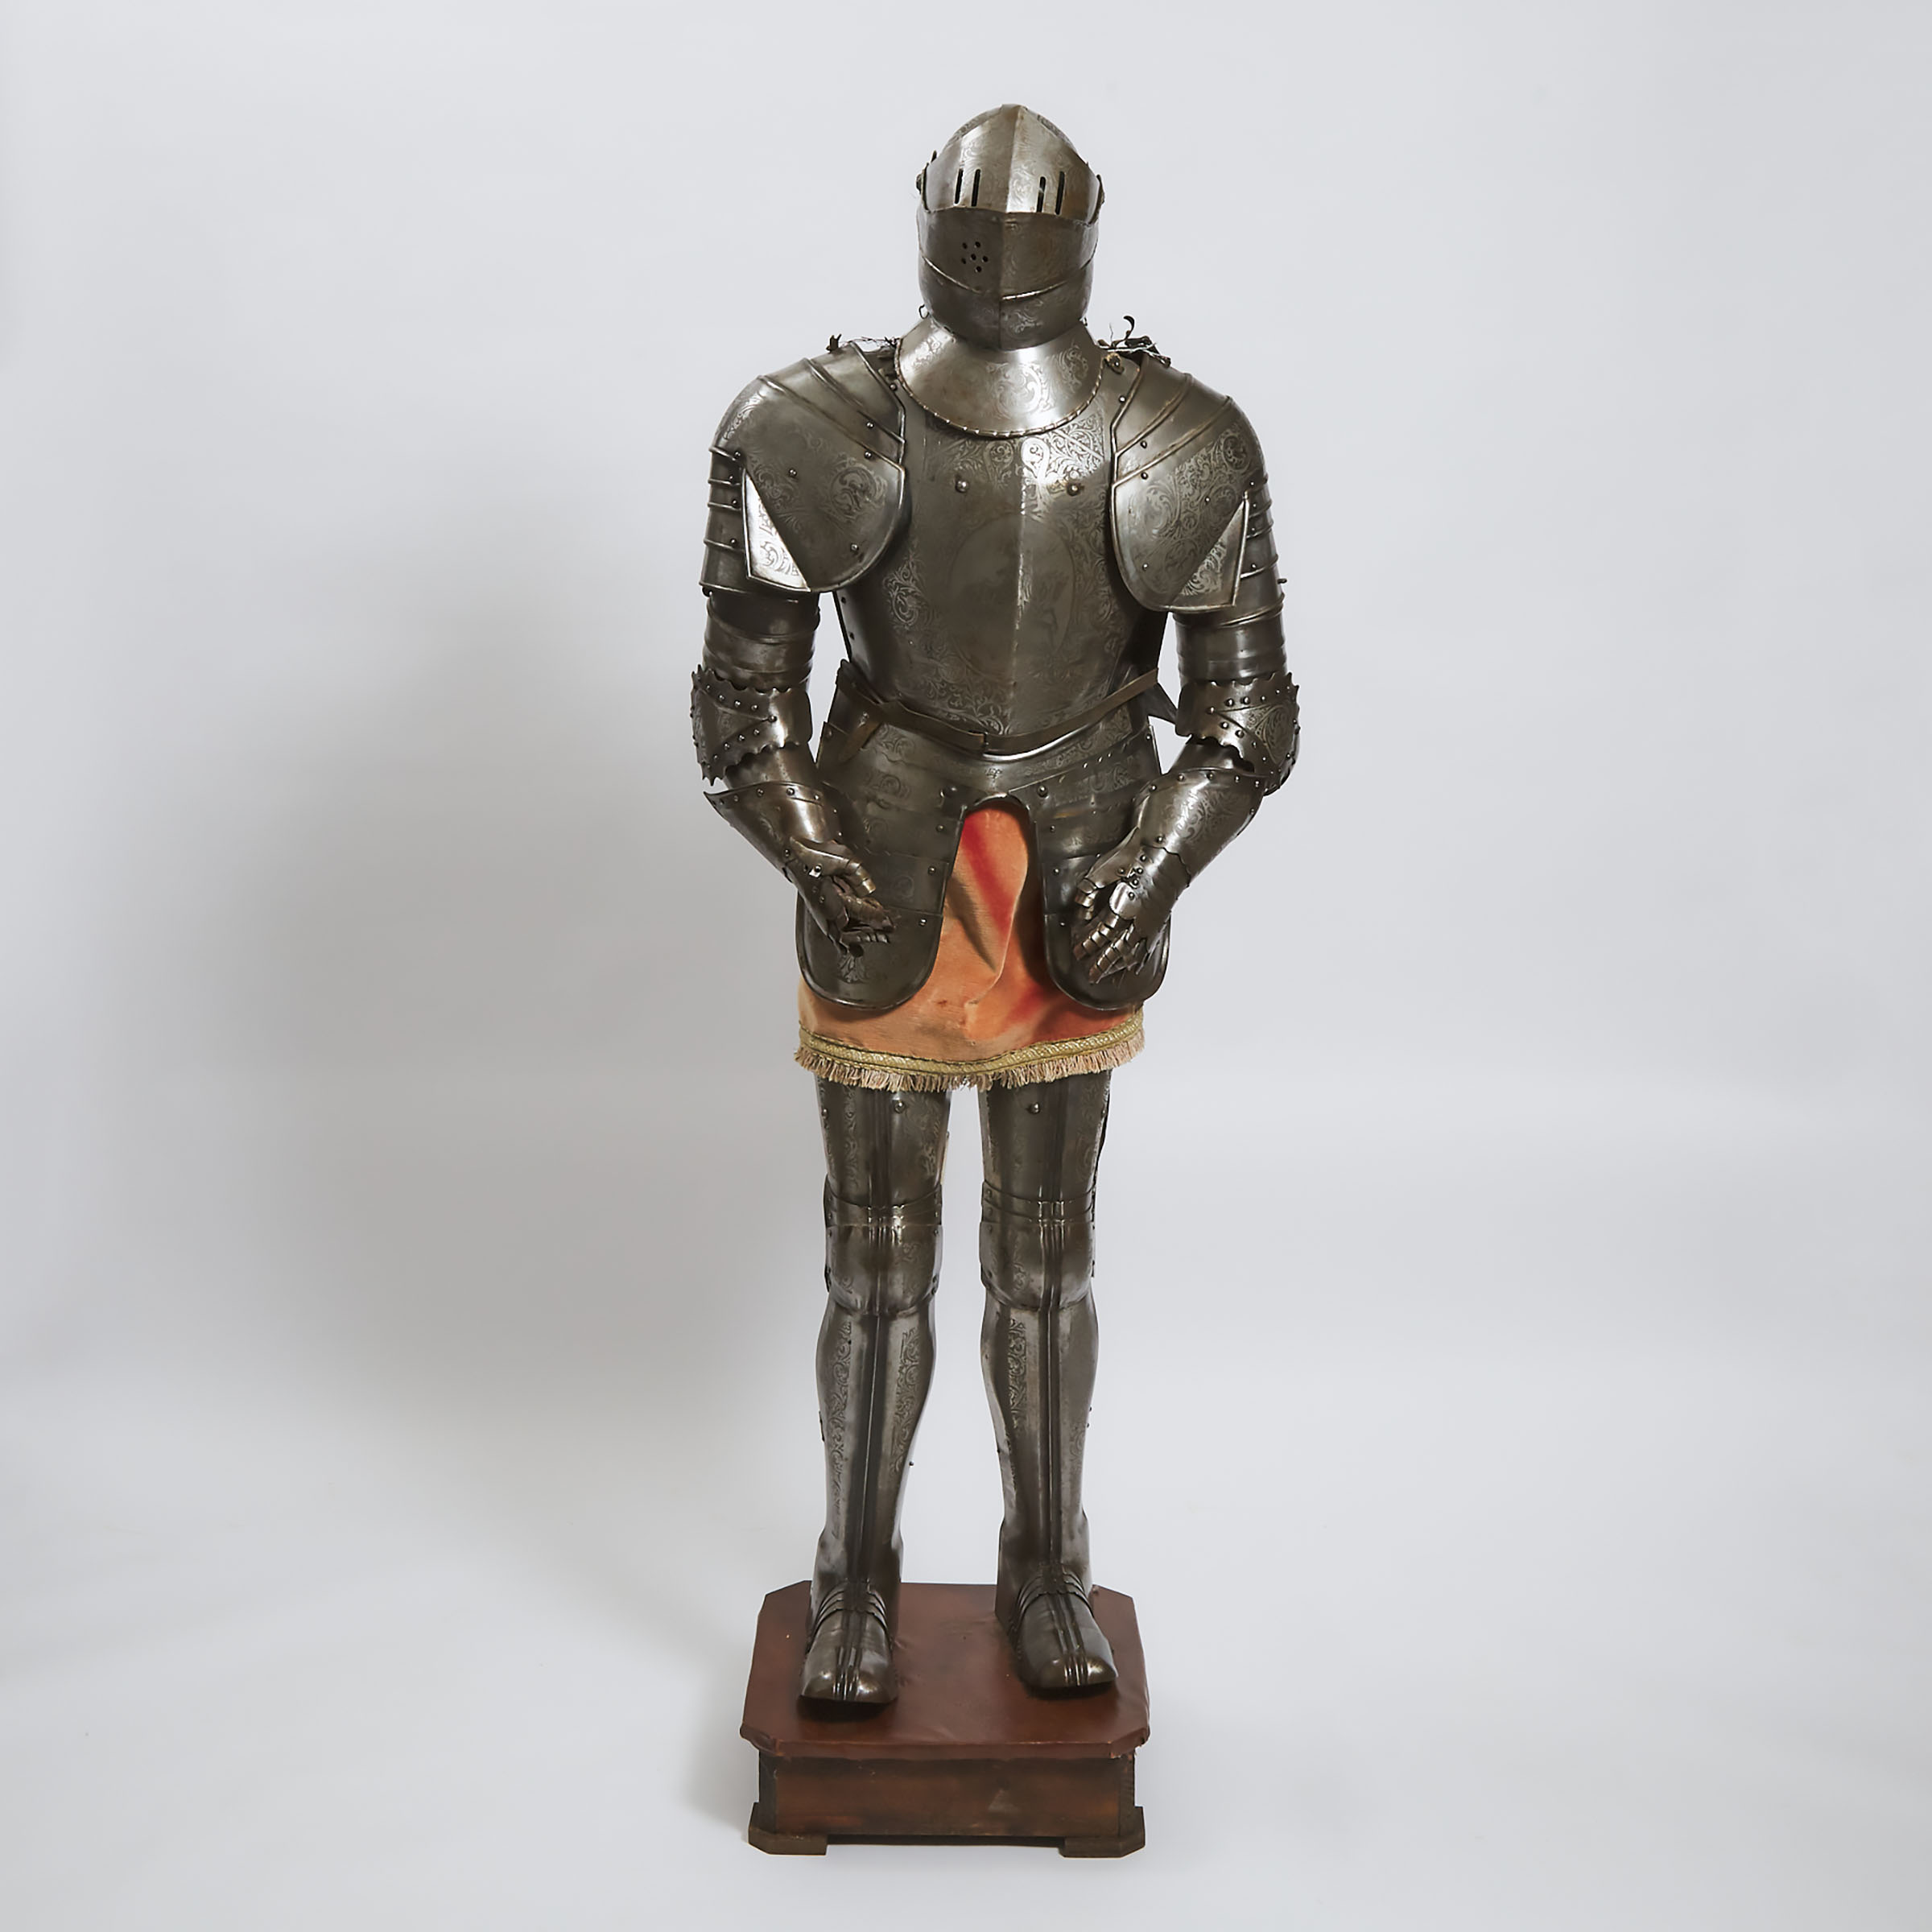 Spanish Renaissance Style Suit of Armour, early 20th century